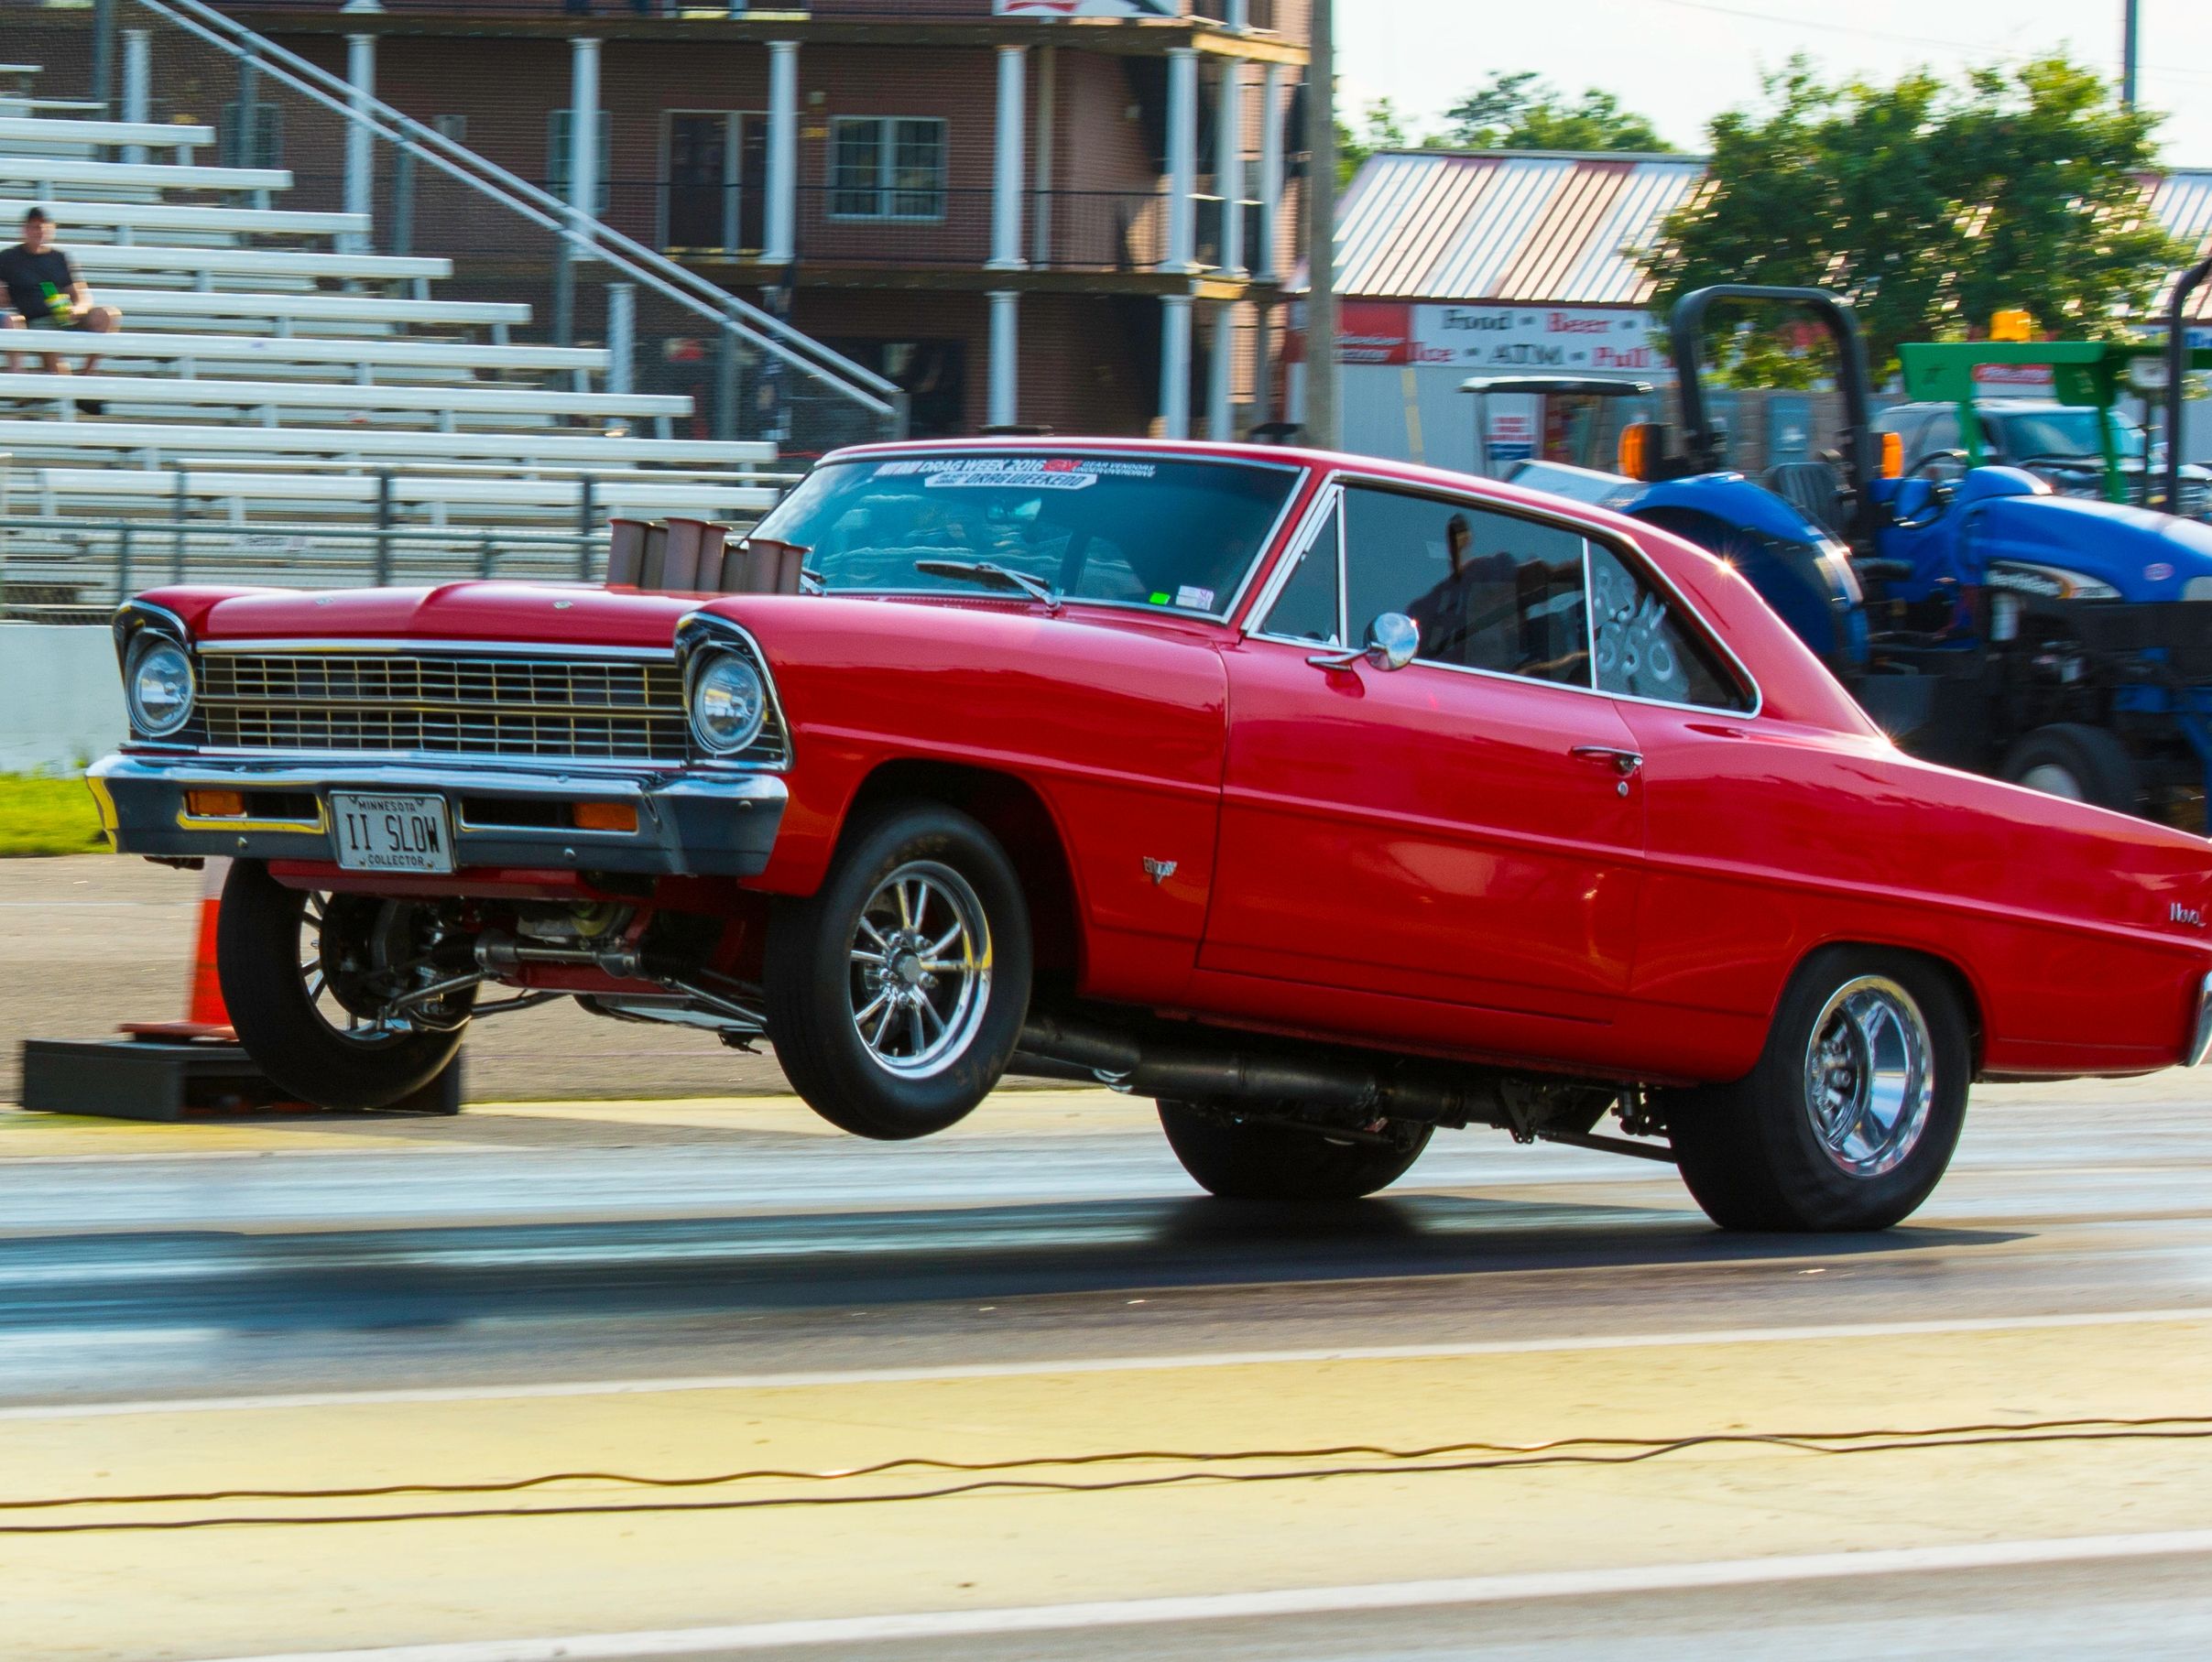 Joshua Norris hangs the hoops in his killer 1967 Nova. Hilborn EFI injected SBC on E85 tuned by Star